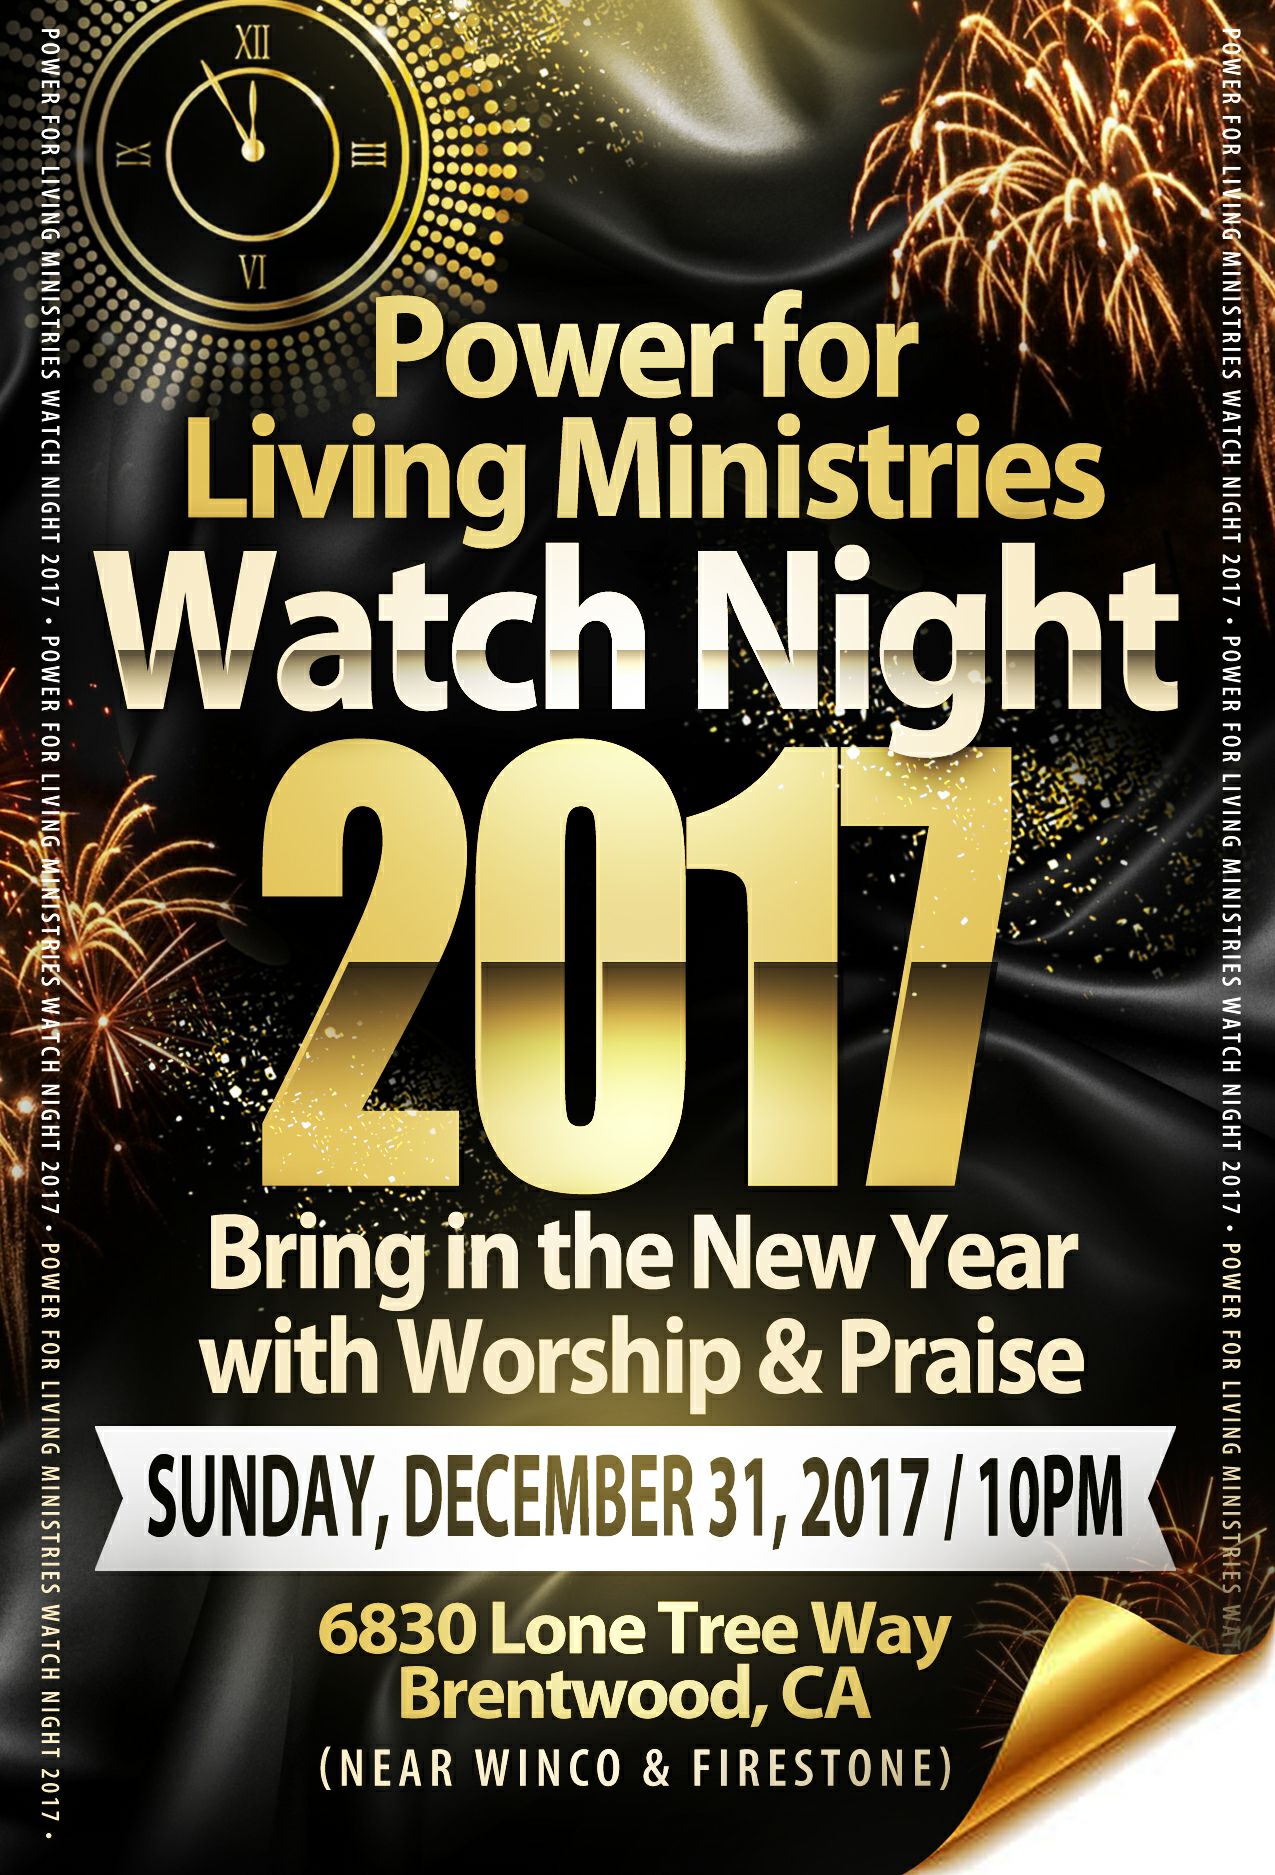 Power for Living Ministries - Watch Night 2017